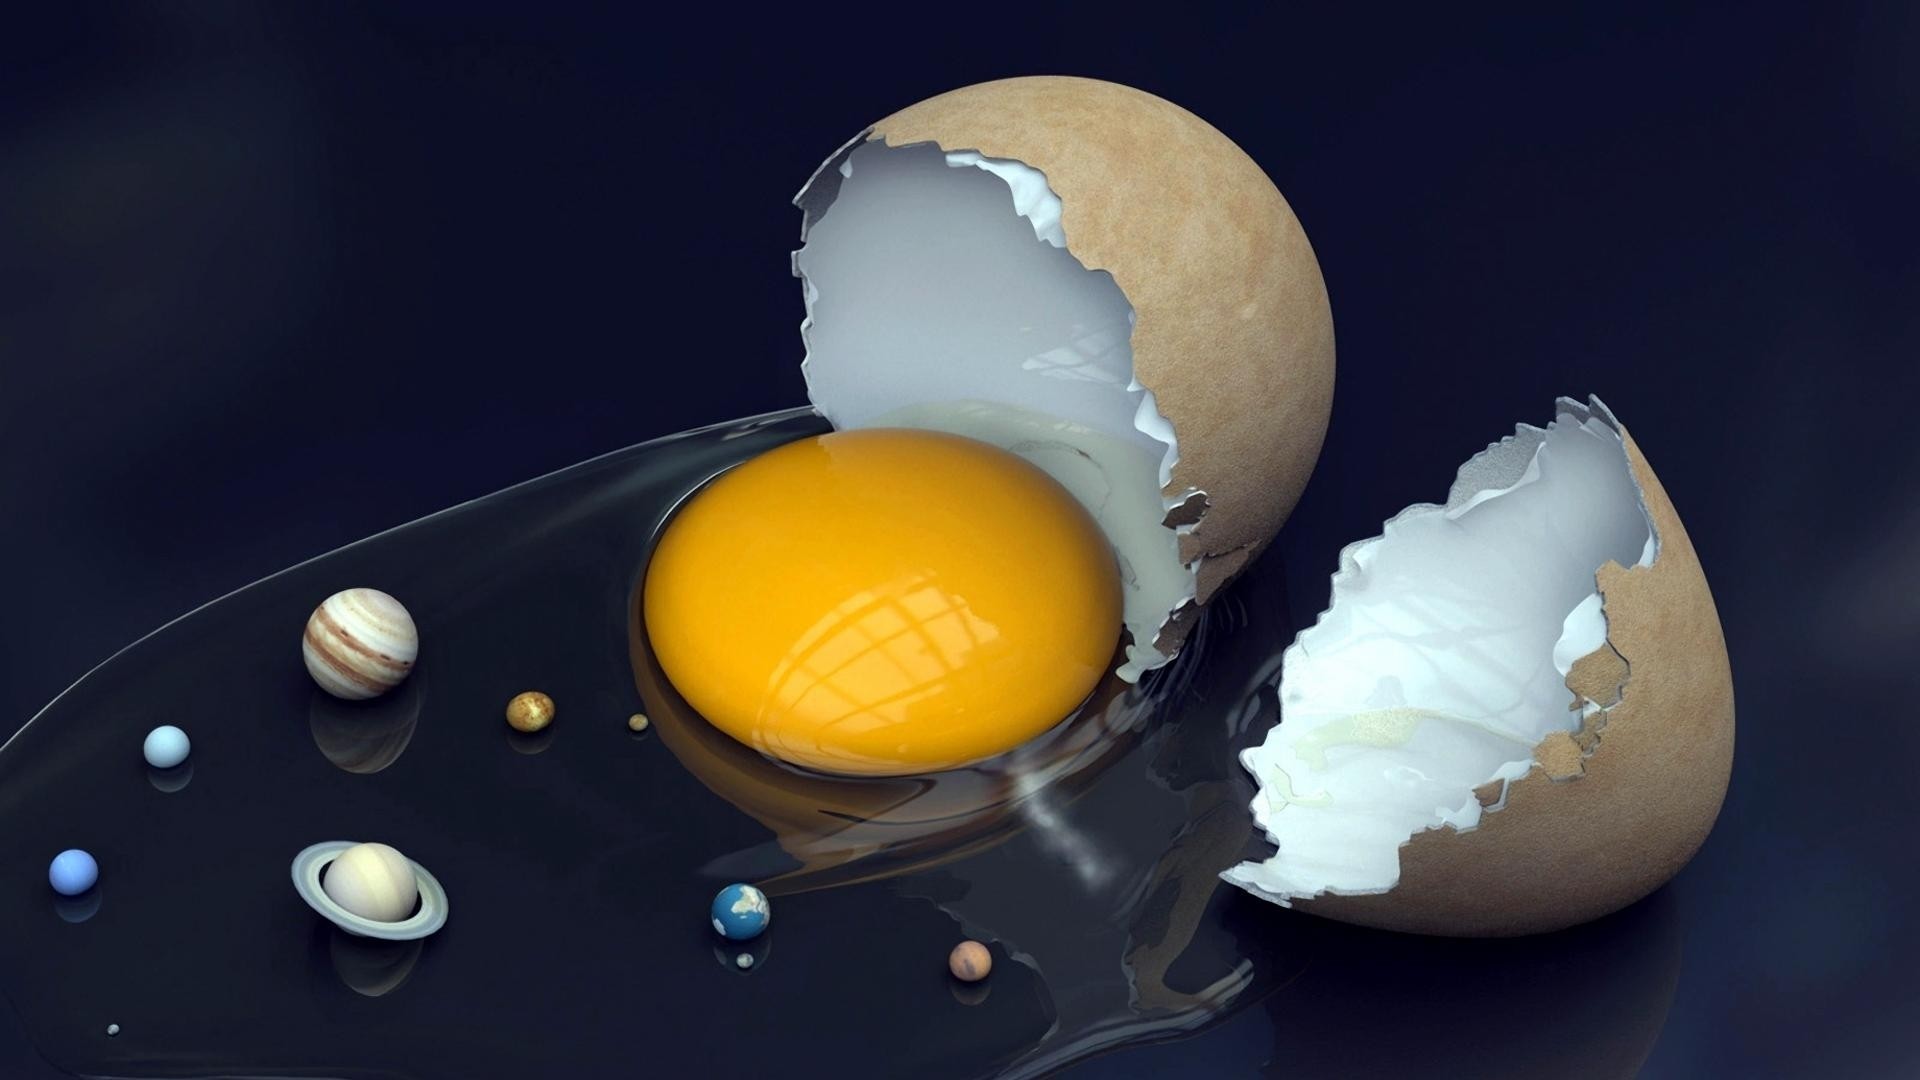 Universe in an egg